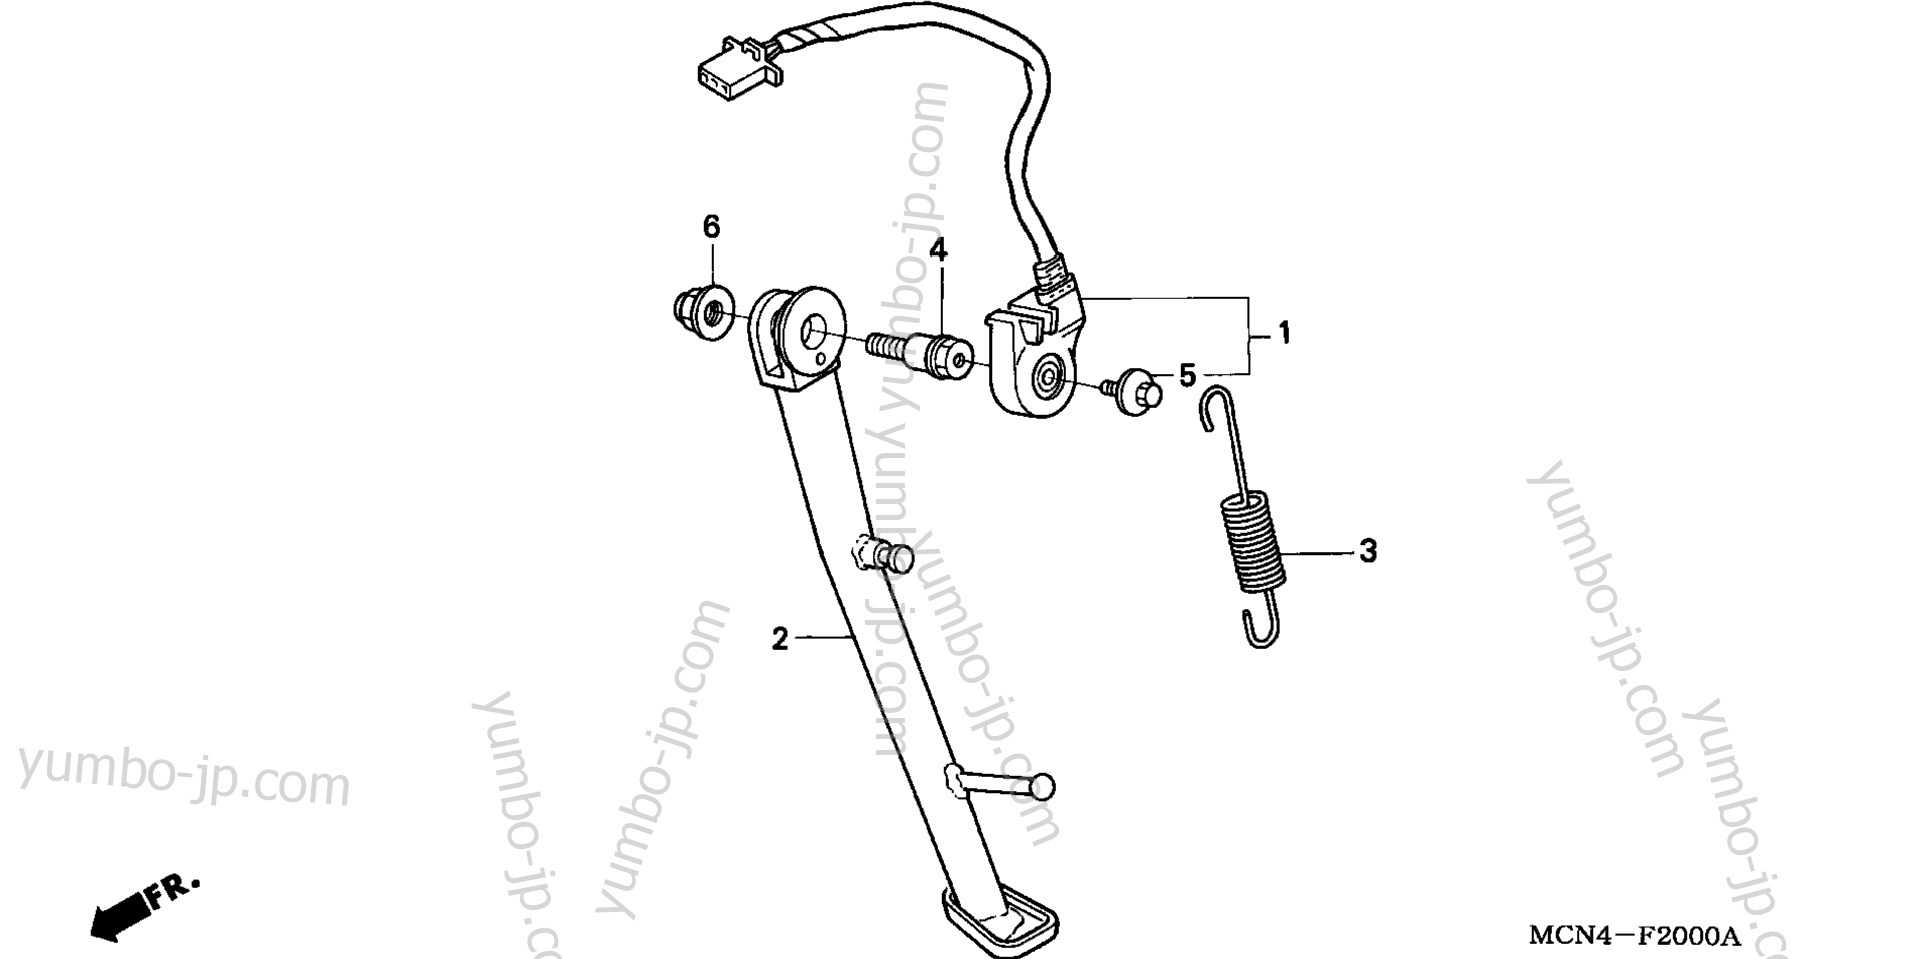 SIDE STAND for motorcycles HONDA CB750 A 2001 year